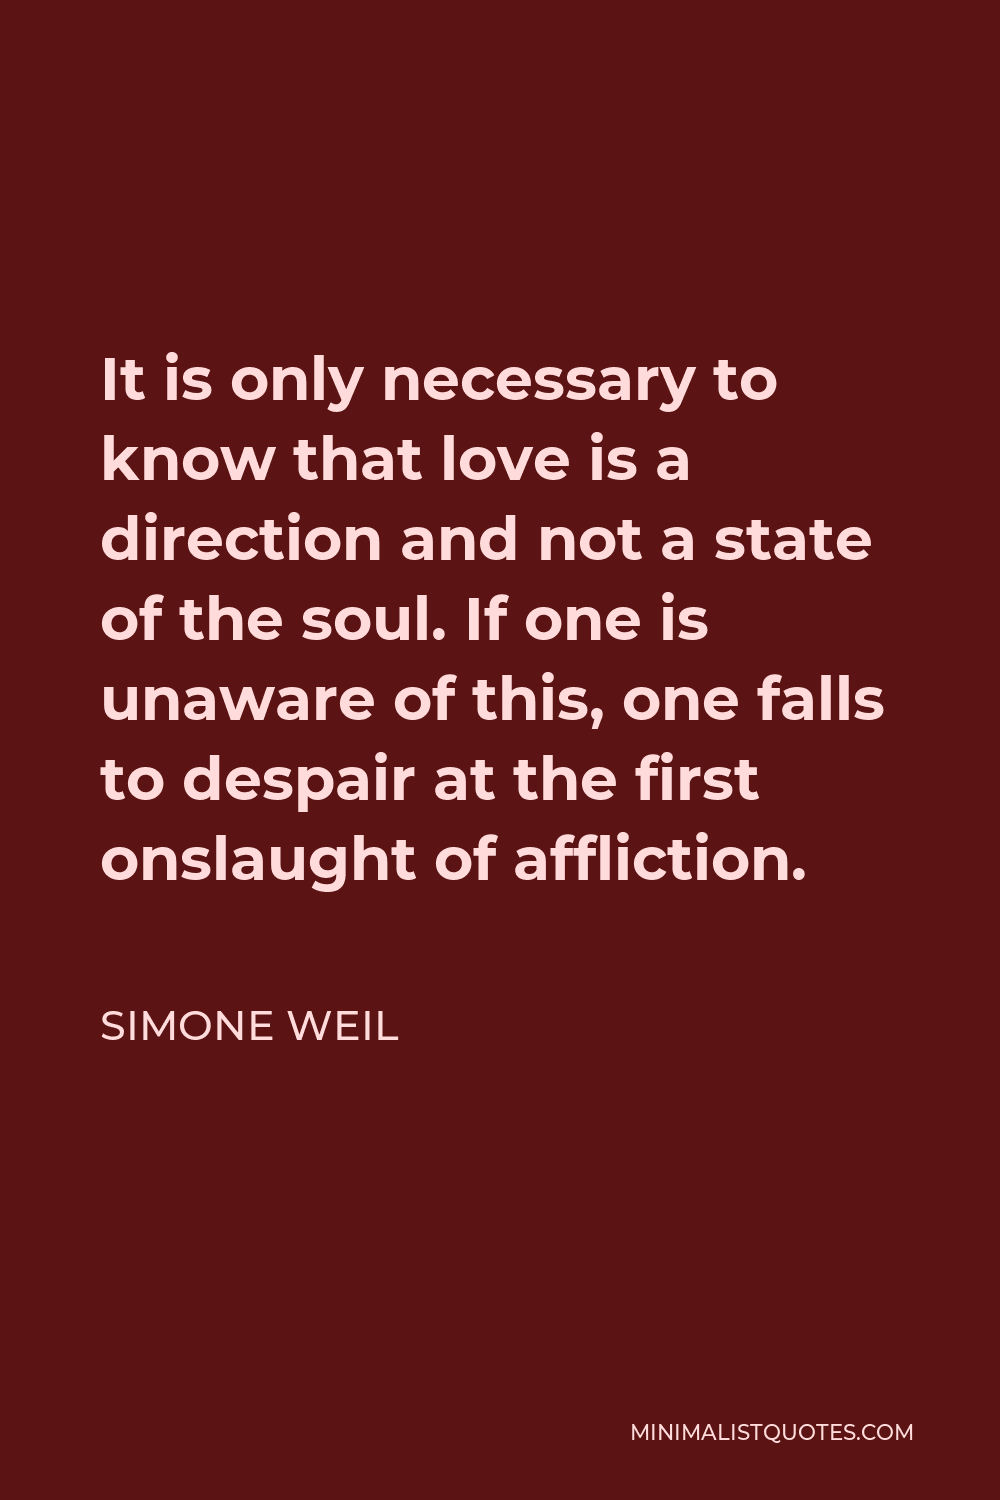 Simone Weil Quote - It is only necessary to know that love is a direction and not a state of the soul. If one is unaware of this, one falls to despair at the first onslaught of affliction.